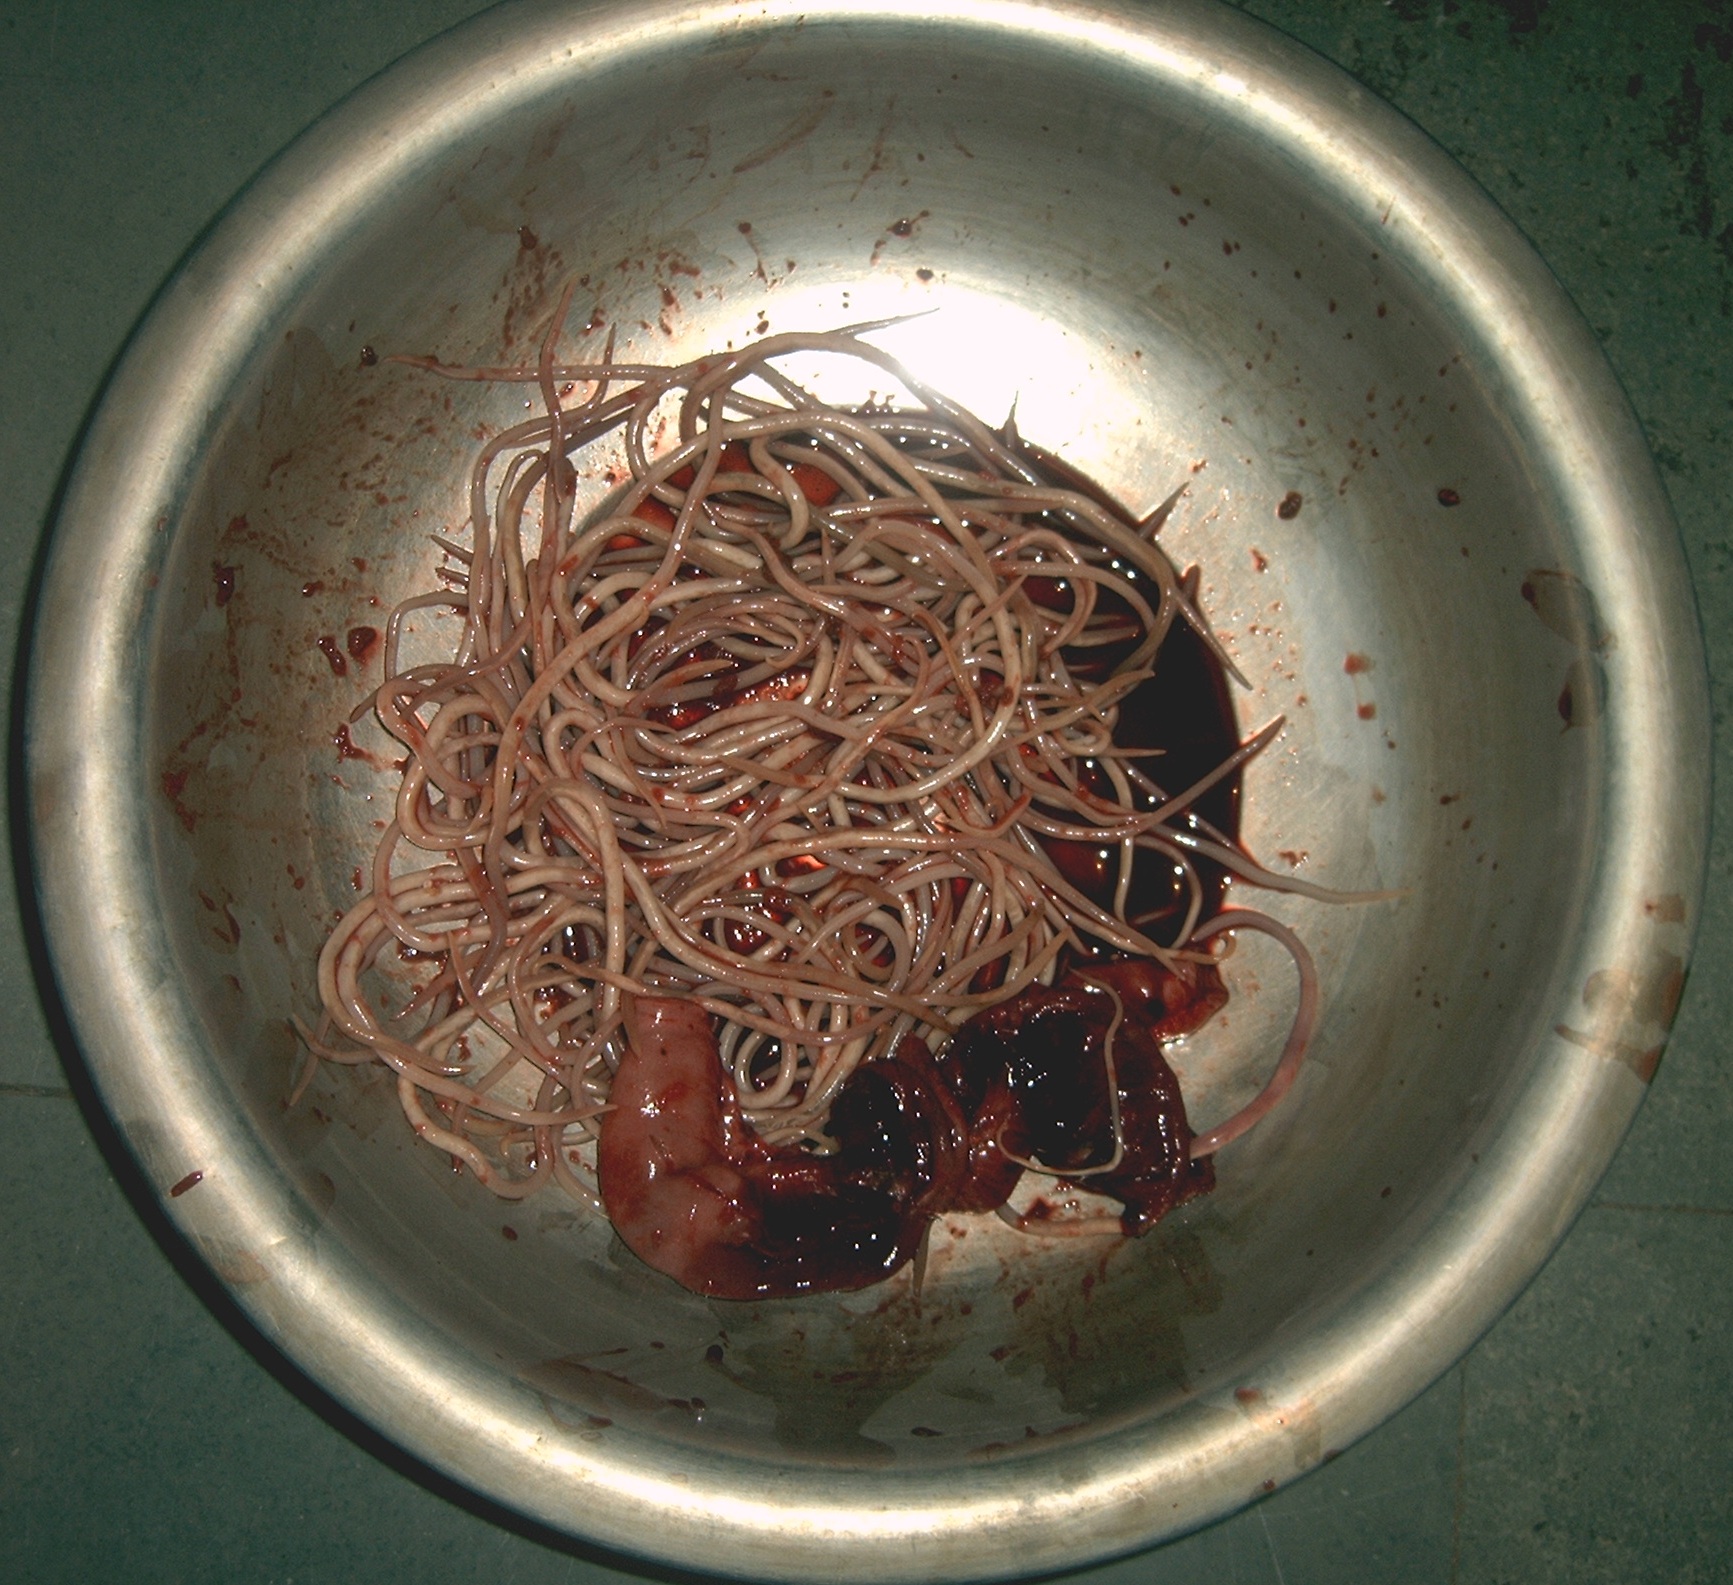 Ascaris lumbricoides caused gangrene of gut (shown worms removed from a child)